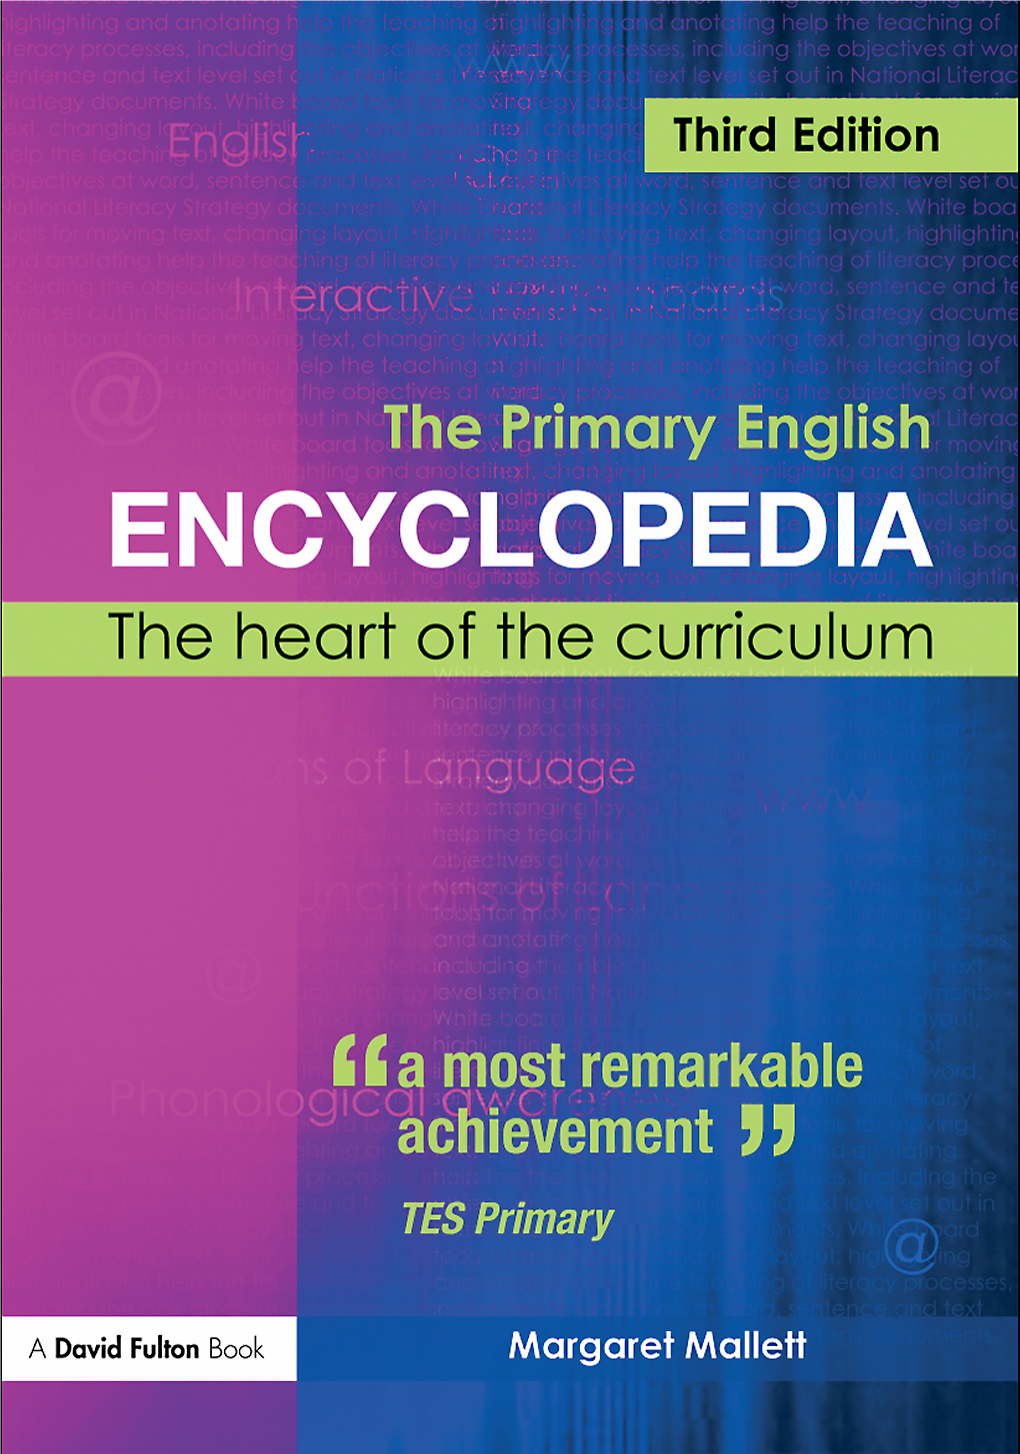 The Primary English Encyclopedia: the Heart of the Curriculum, Third